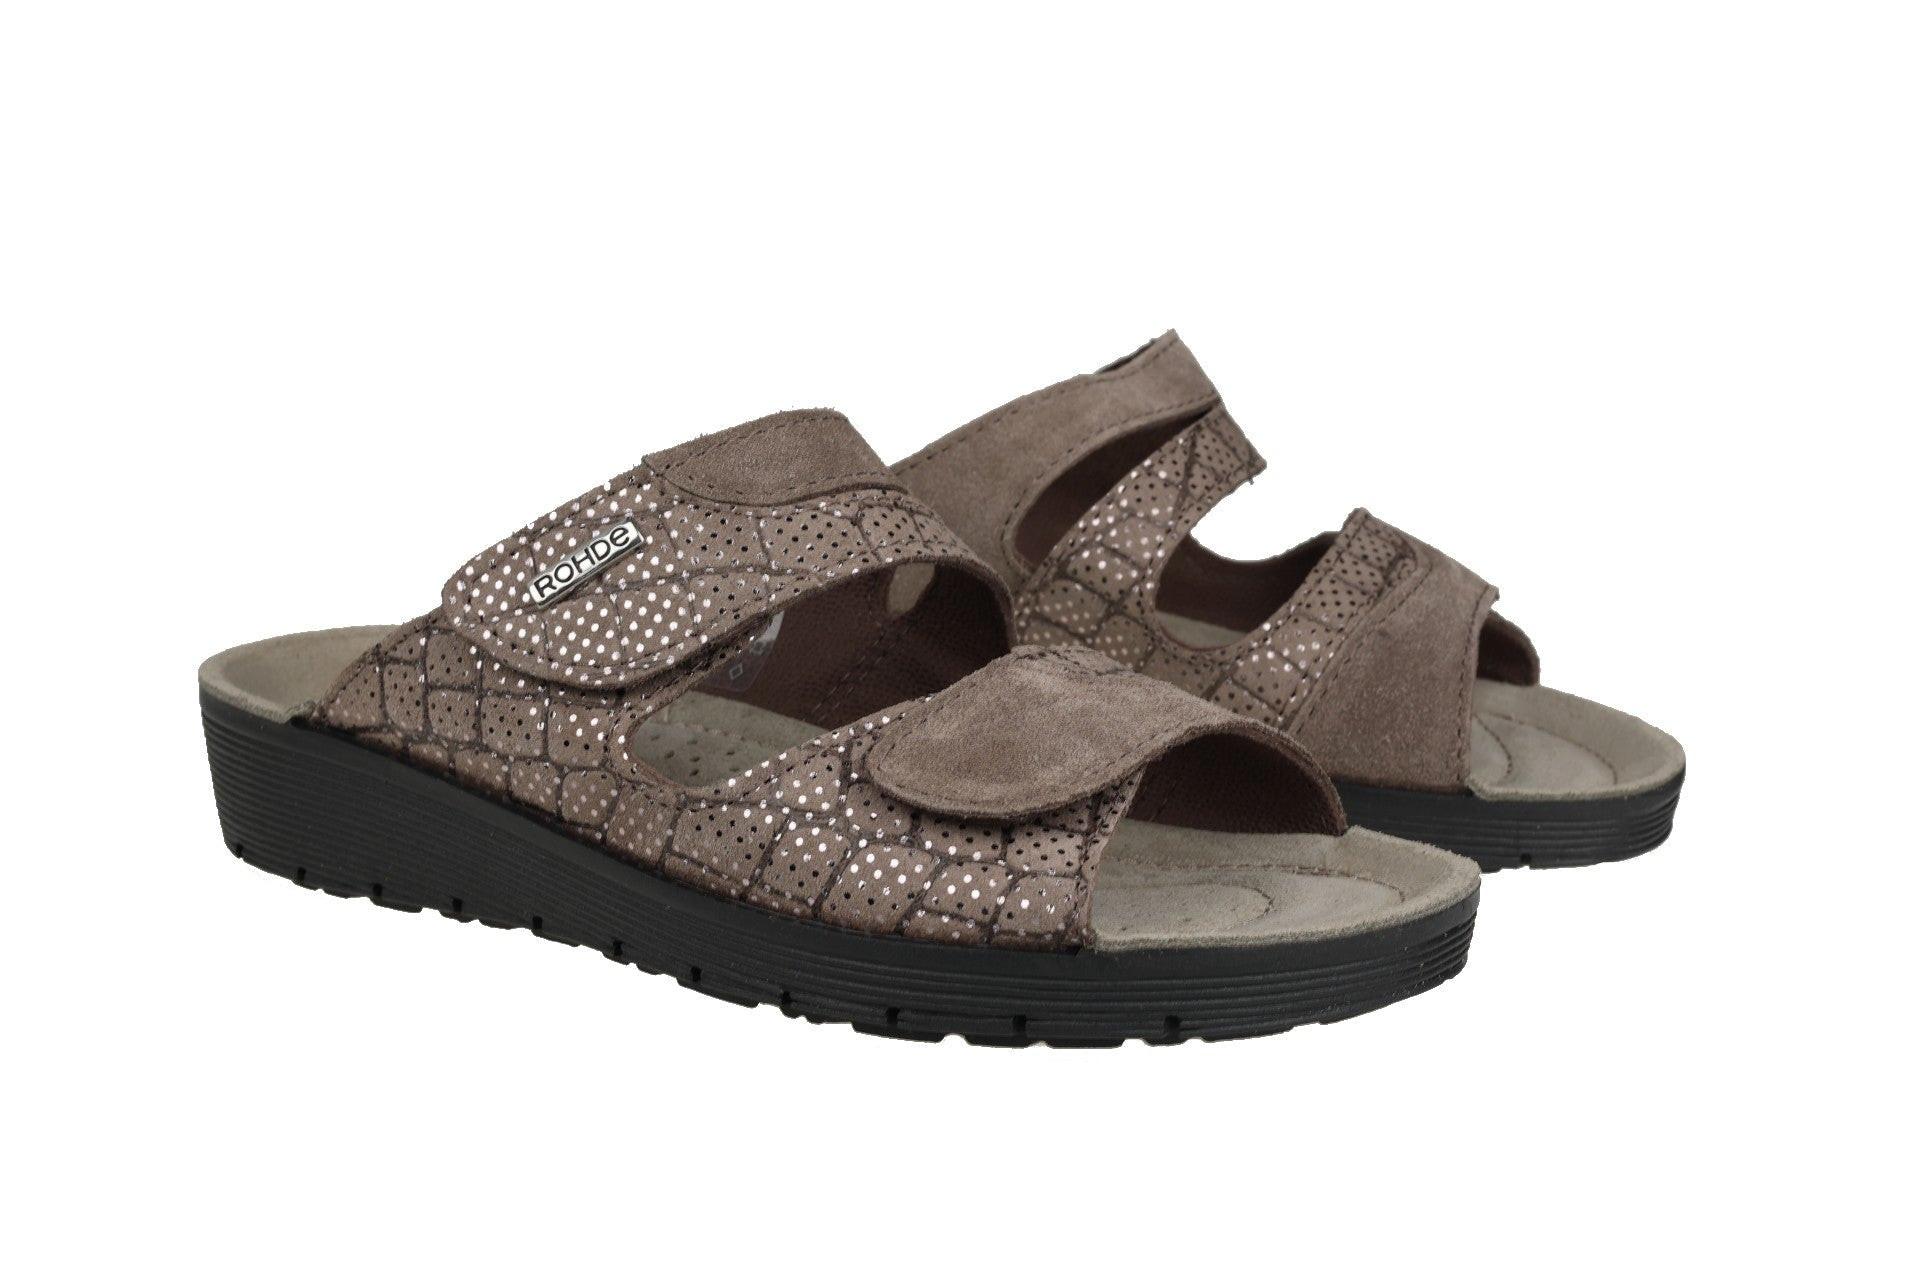 Rohde  Roma - Sandales suede 